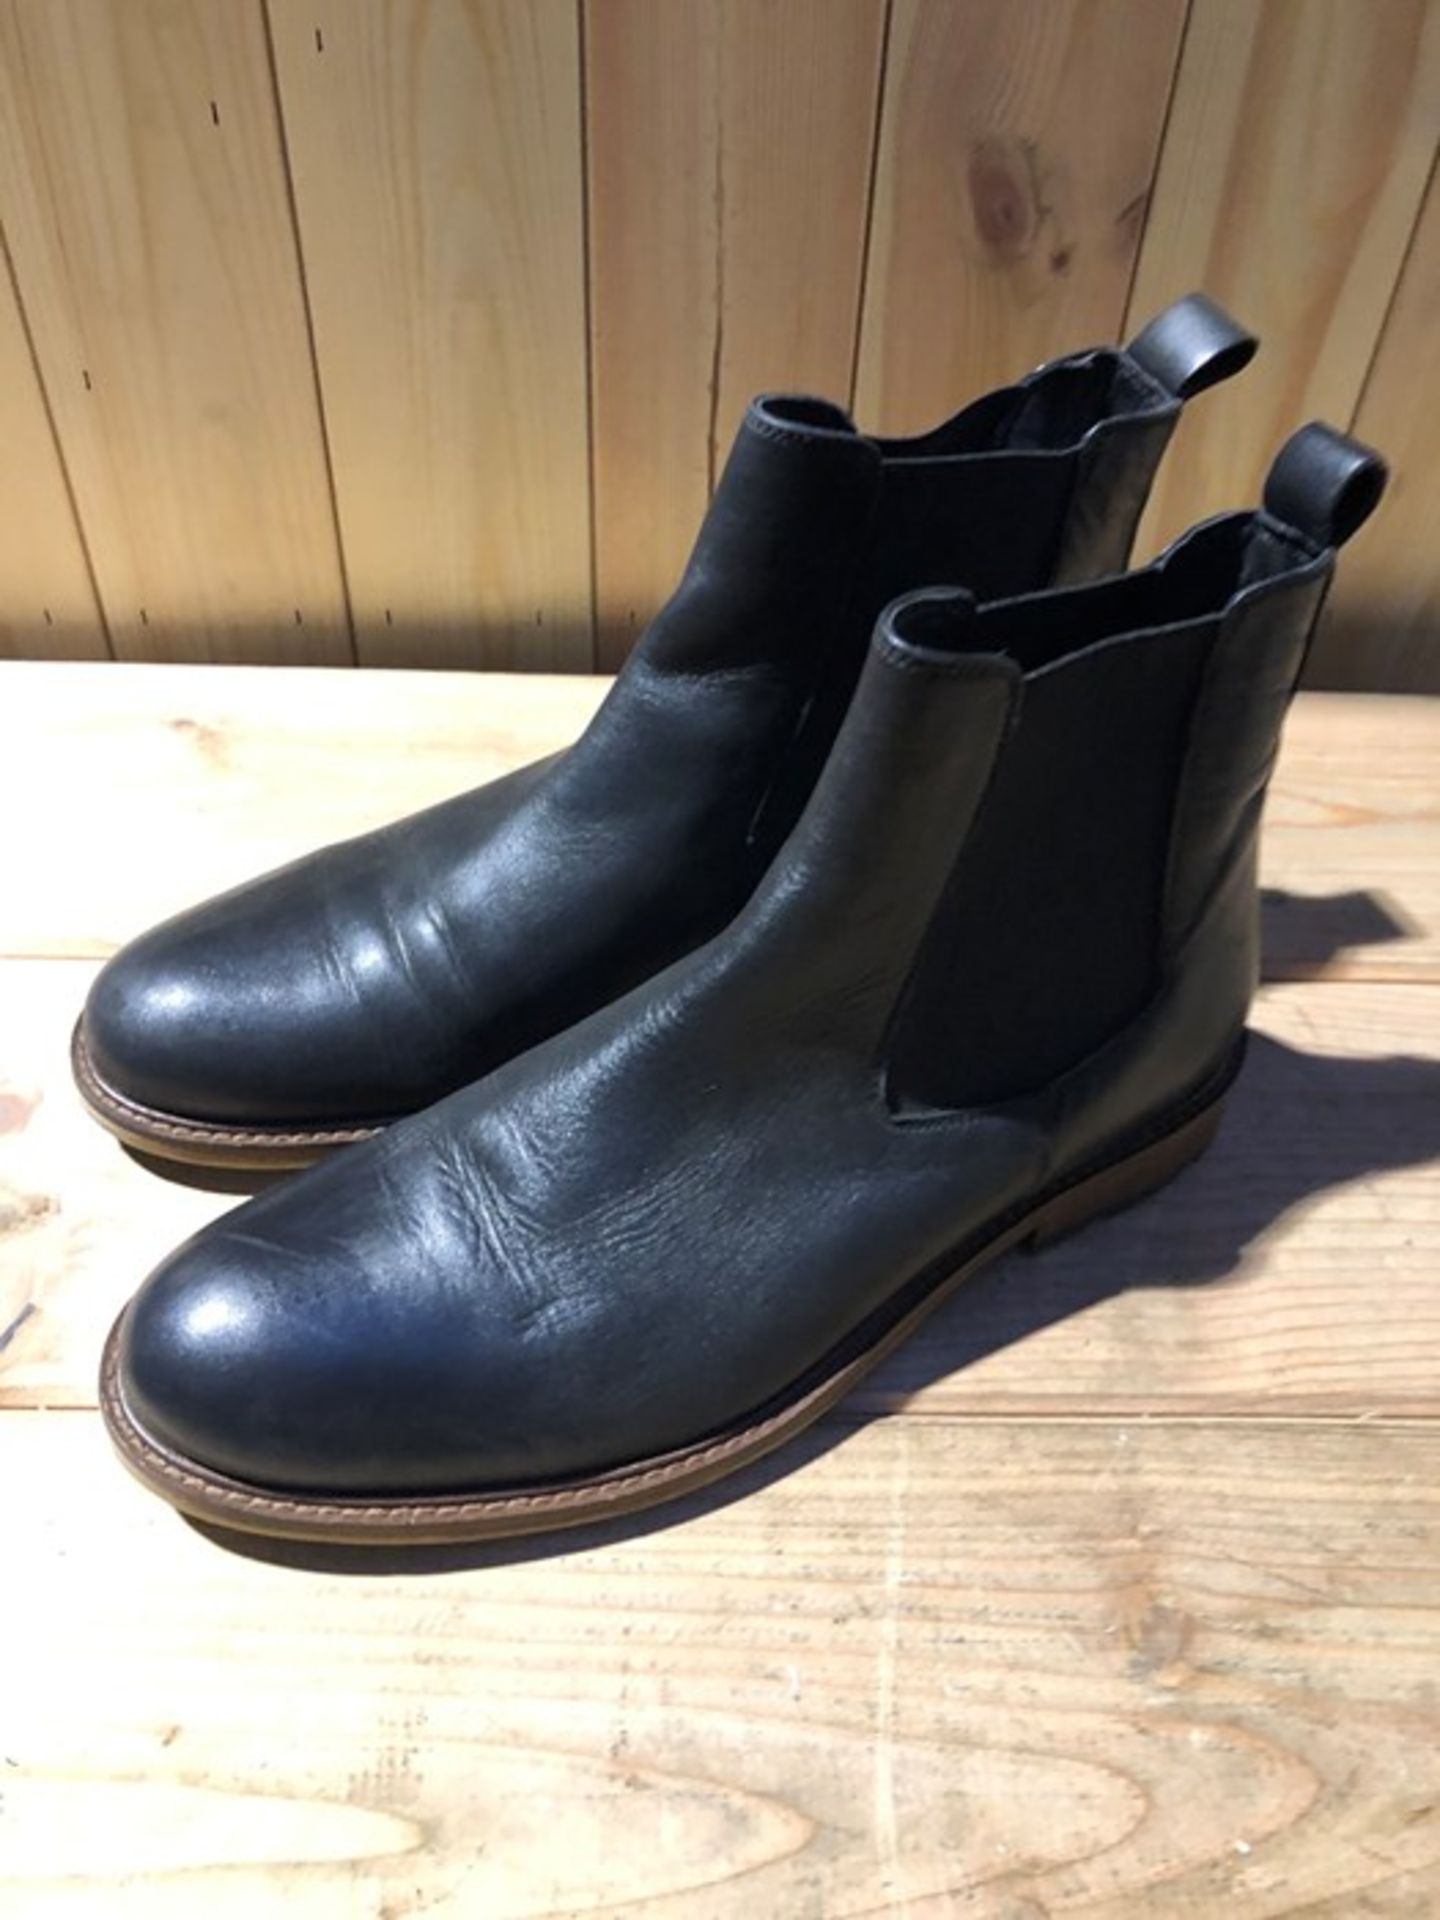 1 PAIR OF LEATER BOOTS IN BLACK / SIZE 8 UK (PUBLIC VIEWING AVAILABLE)